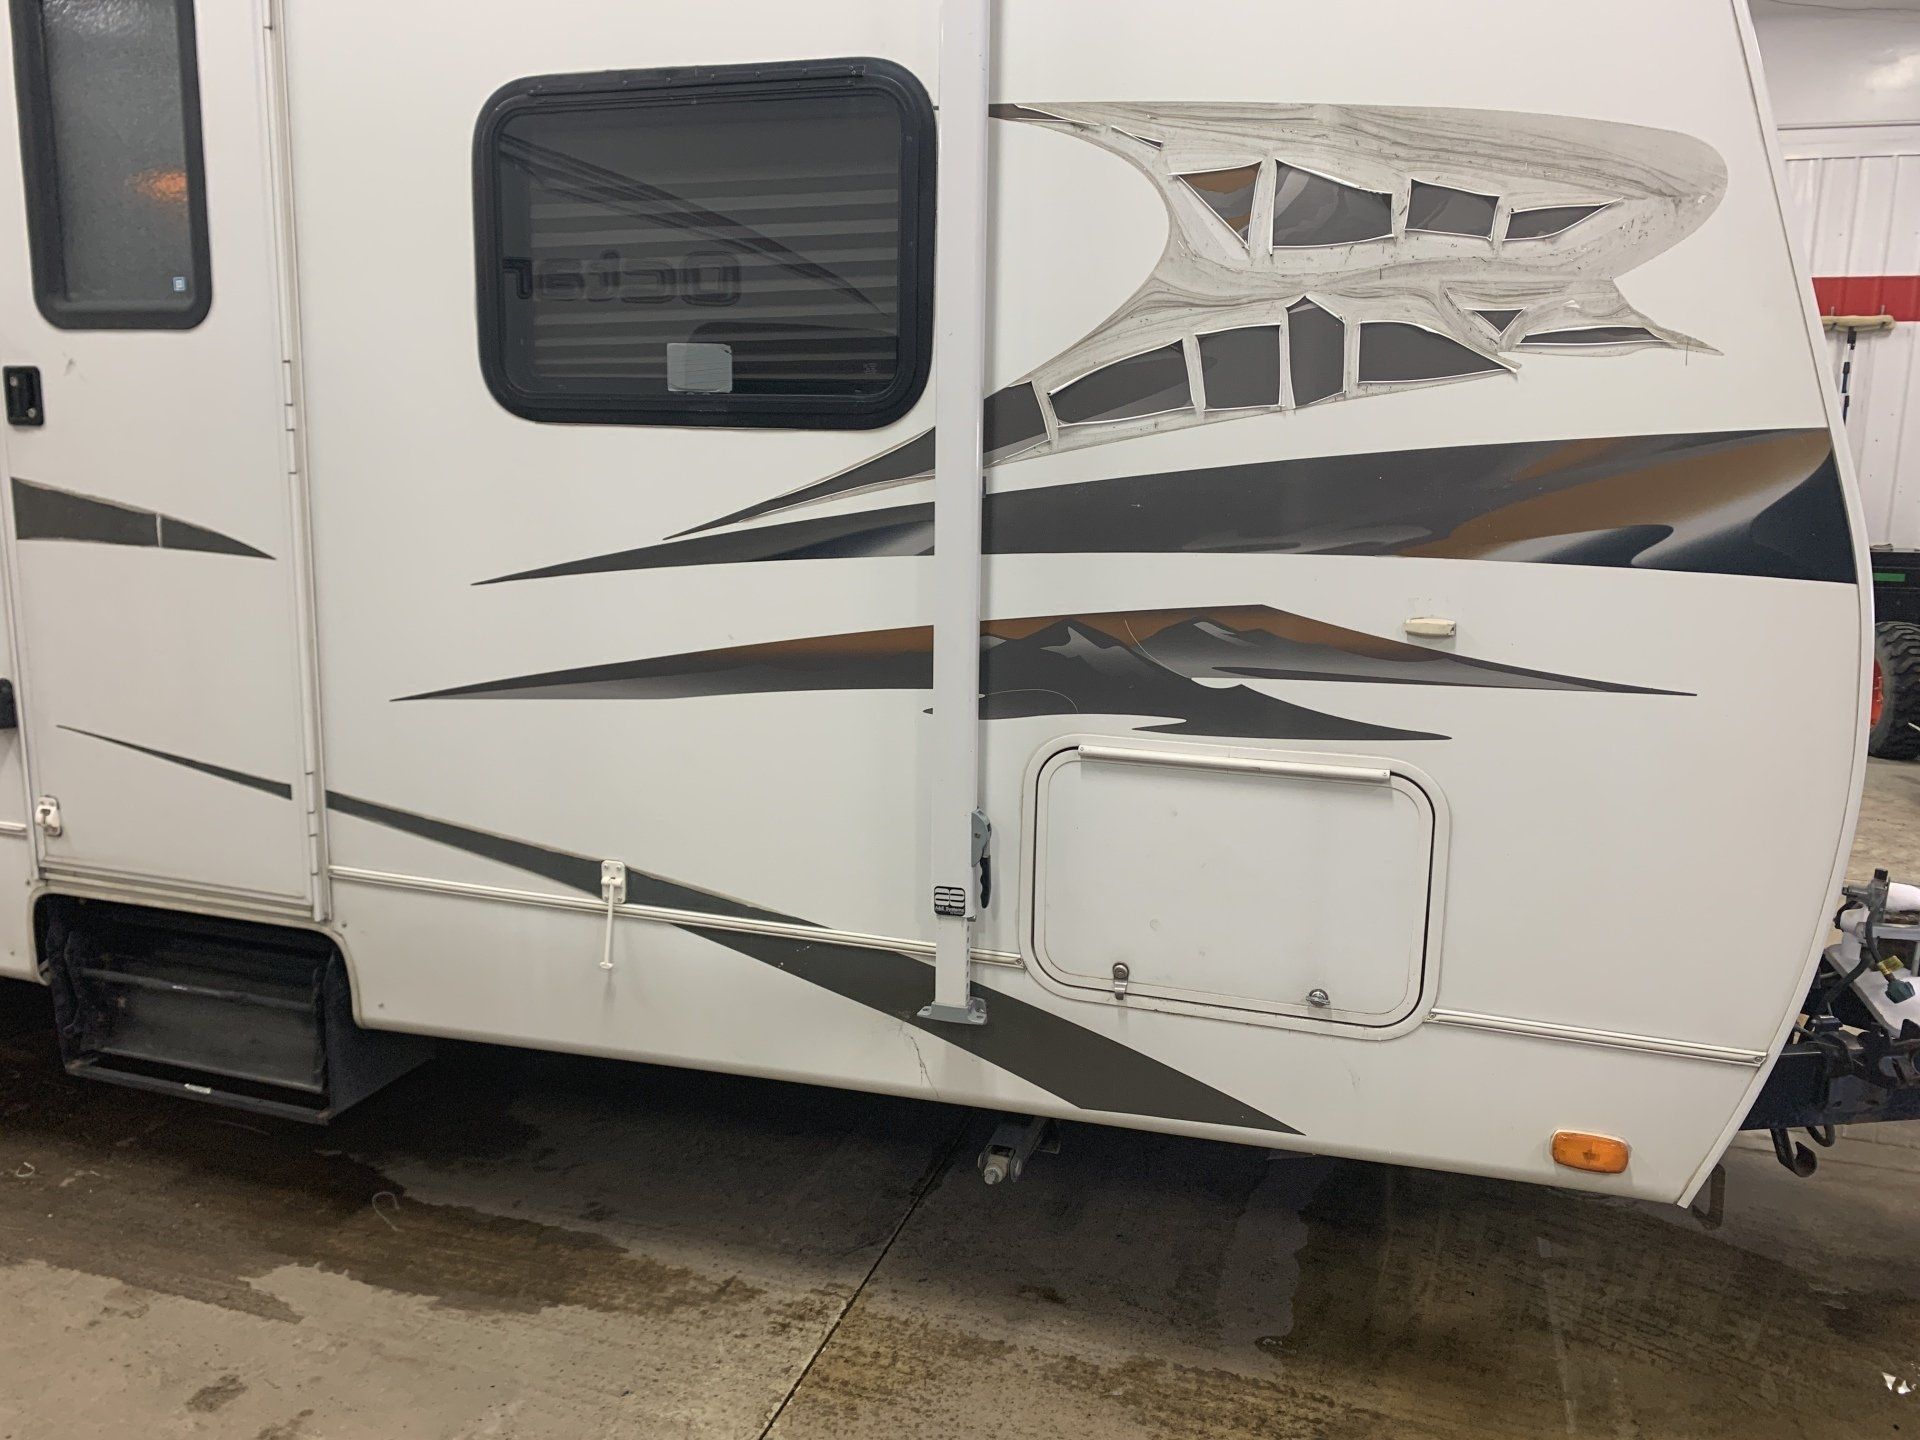 2020 - Alberta's Worst RV Decal Contest - Grand Prize Winner - Before & After - Pic 17